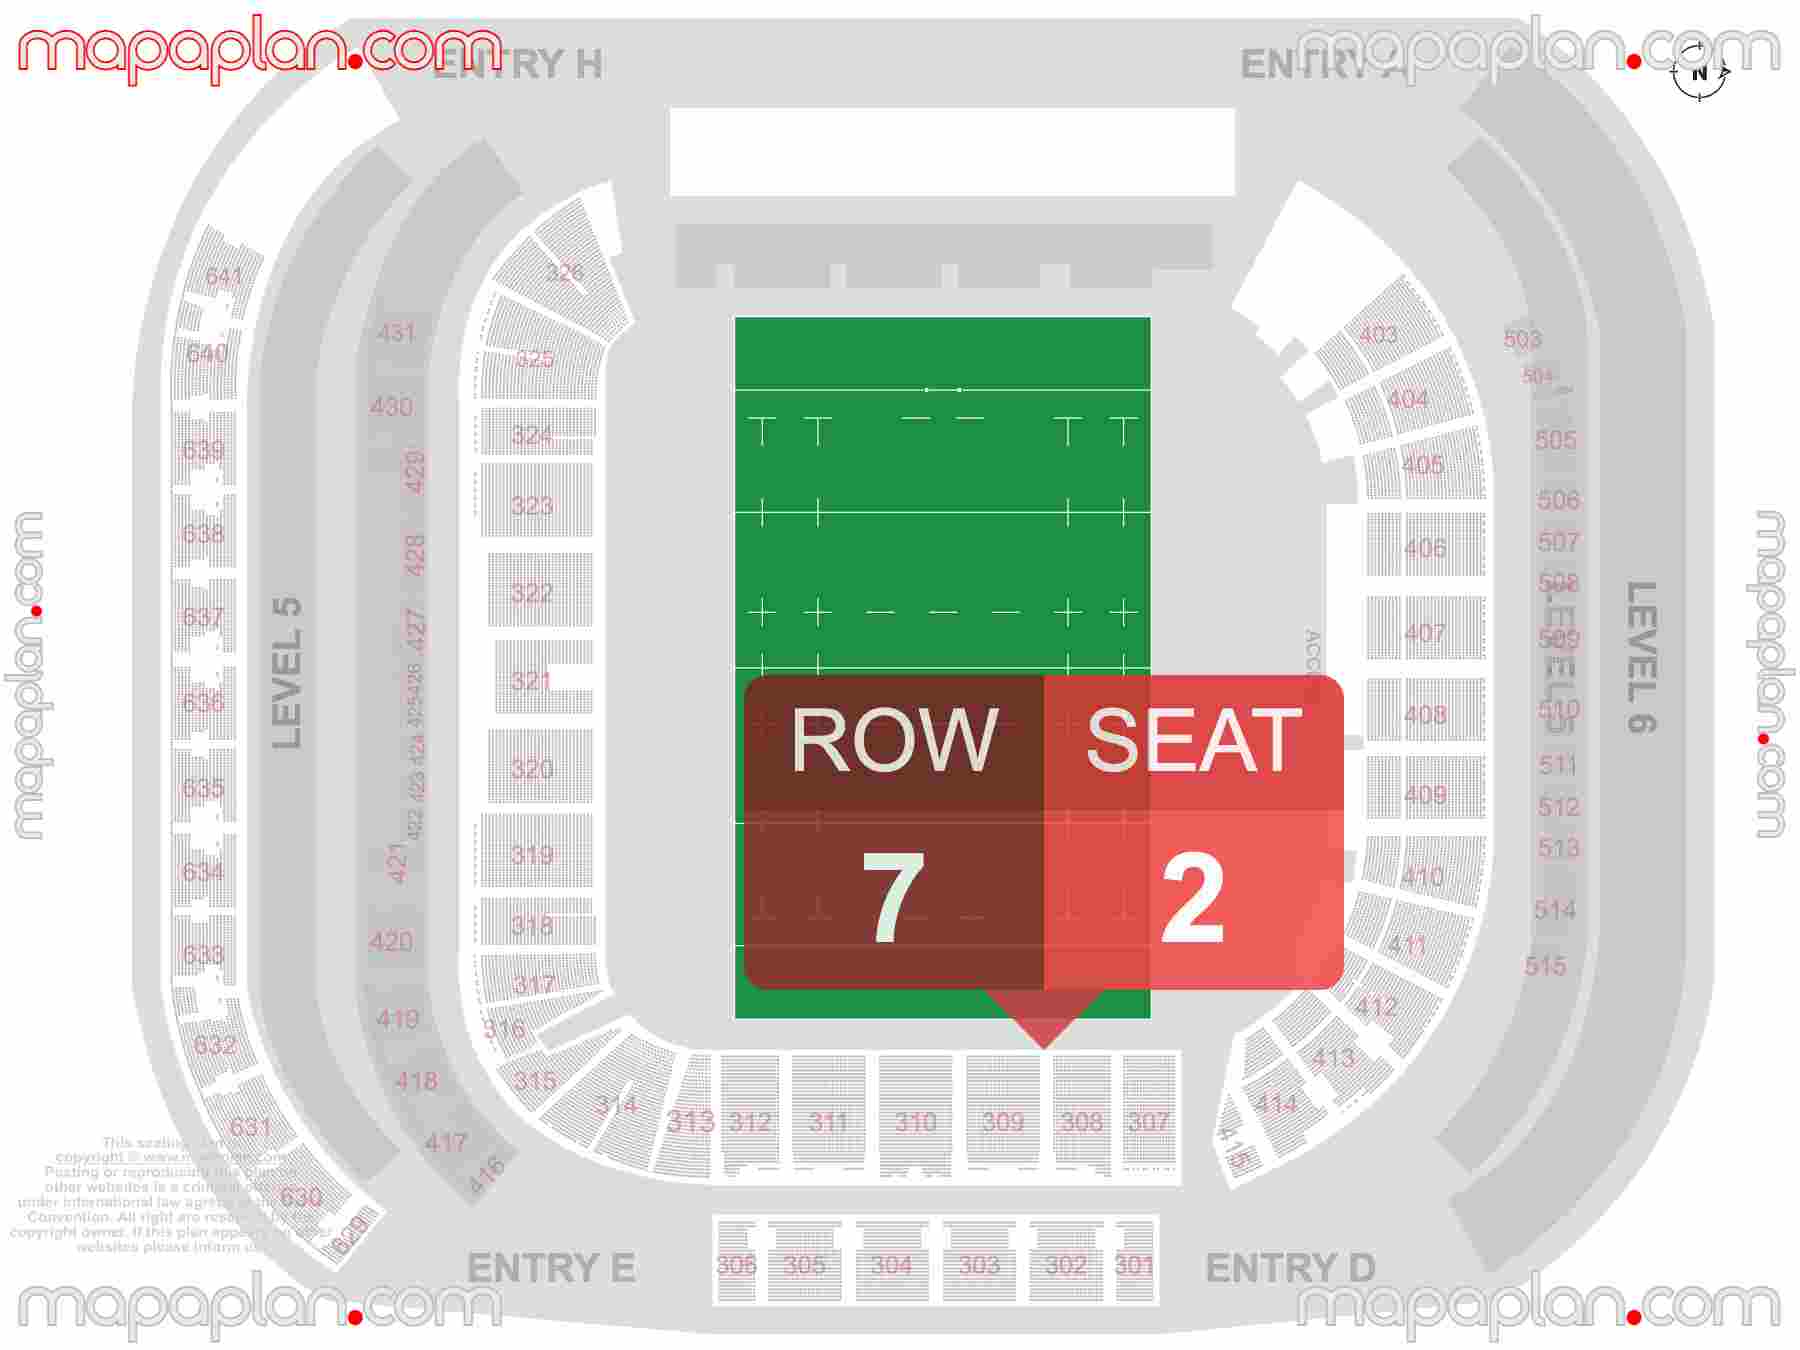 Auckland Eden Park Stadium seating map Rugby and cricket inside capacity view arrangement plan - Interactive virtual 3d best seats & rows detailed stadium image configuration layout